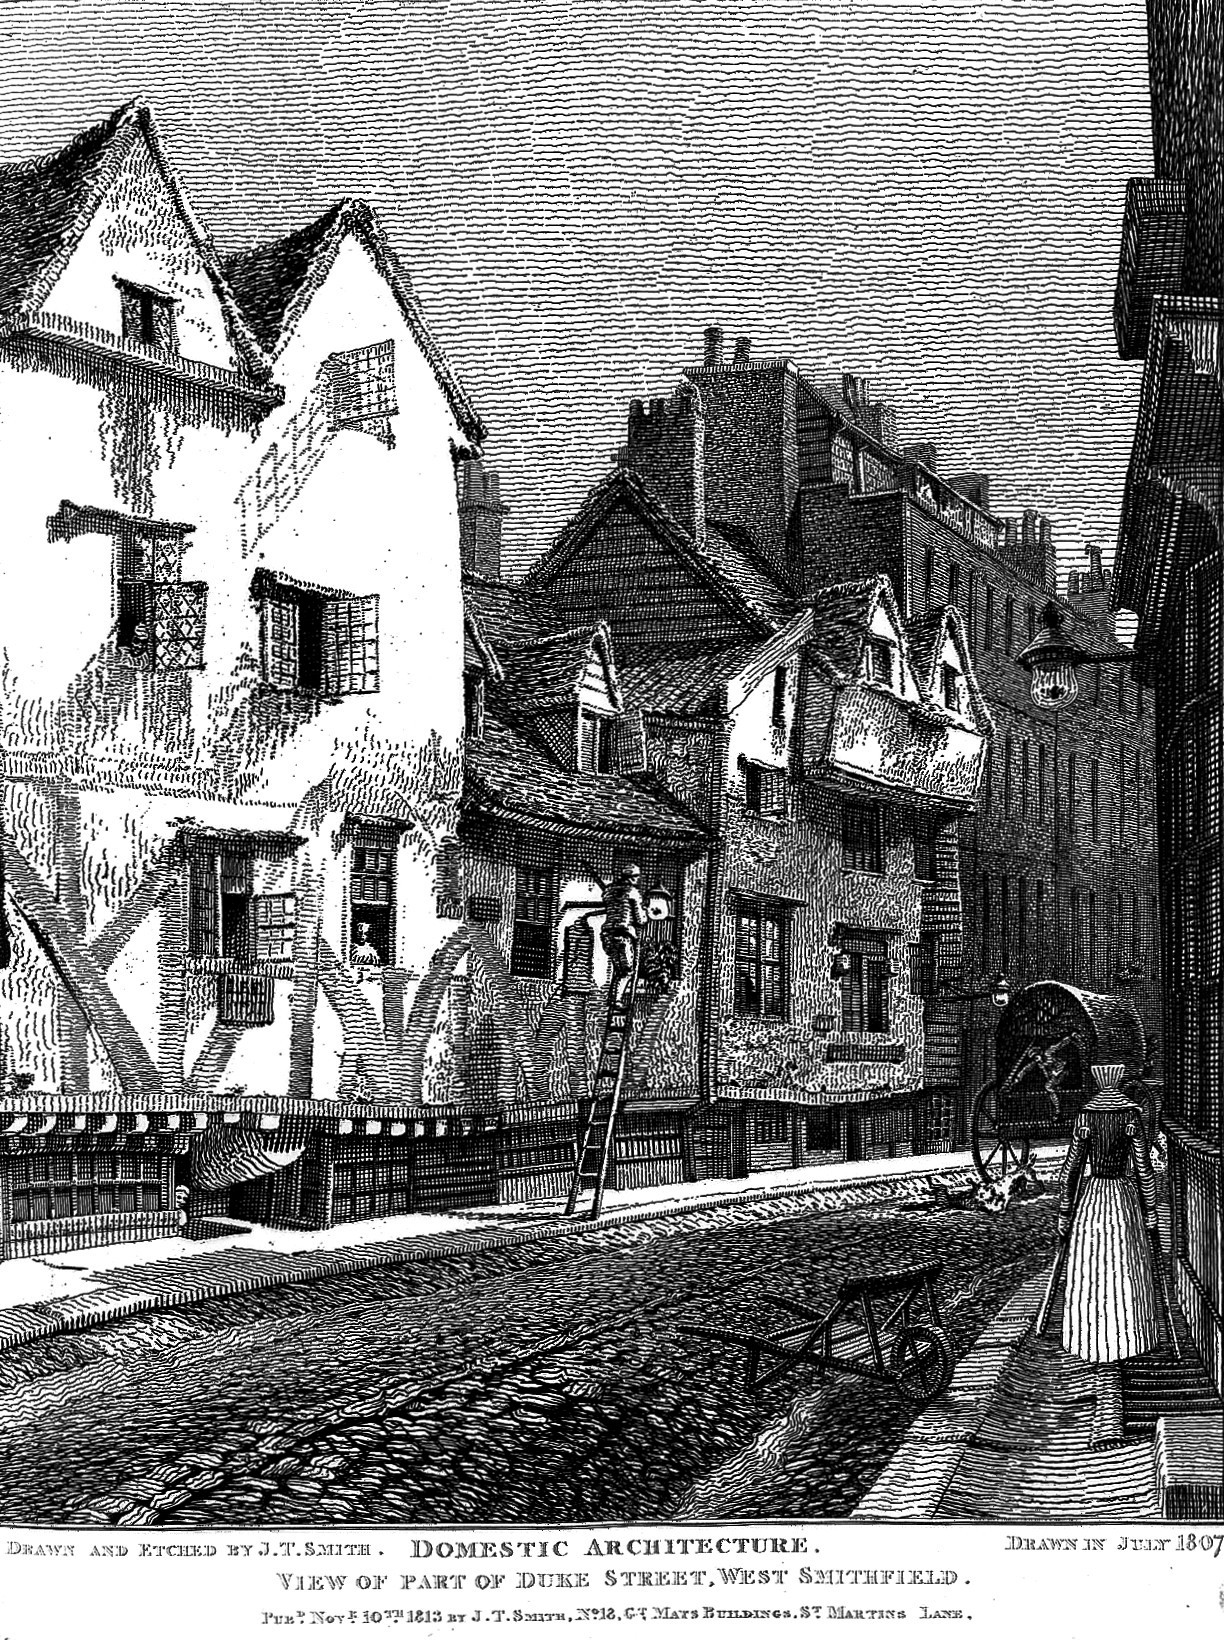 Black and white illustration showing domestic architecture: a cobbled street with tall buildings on either side.